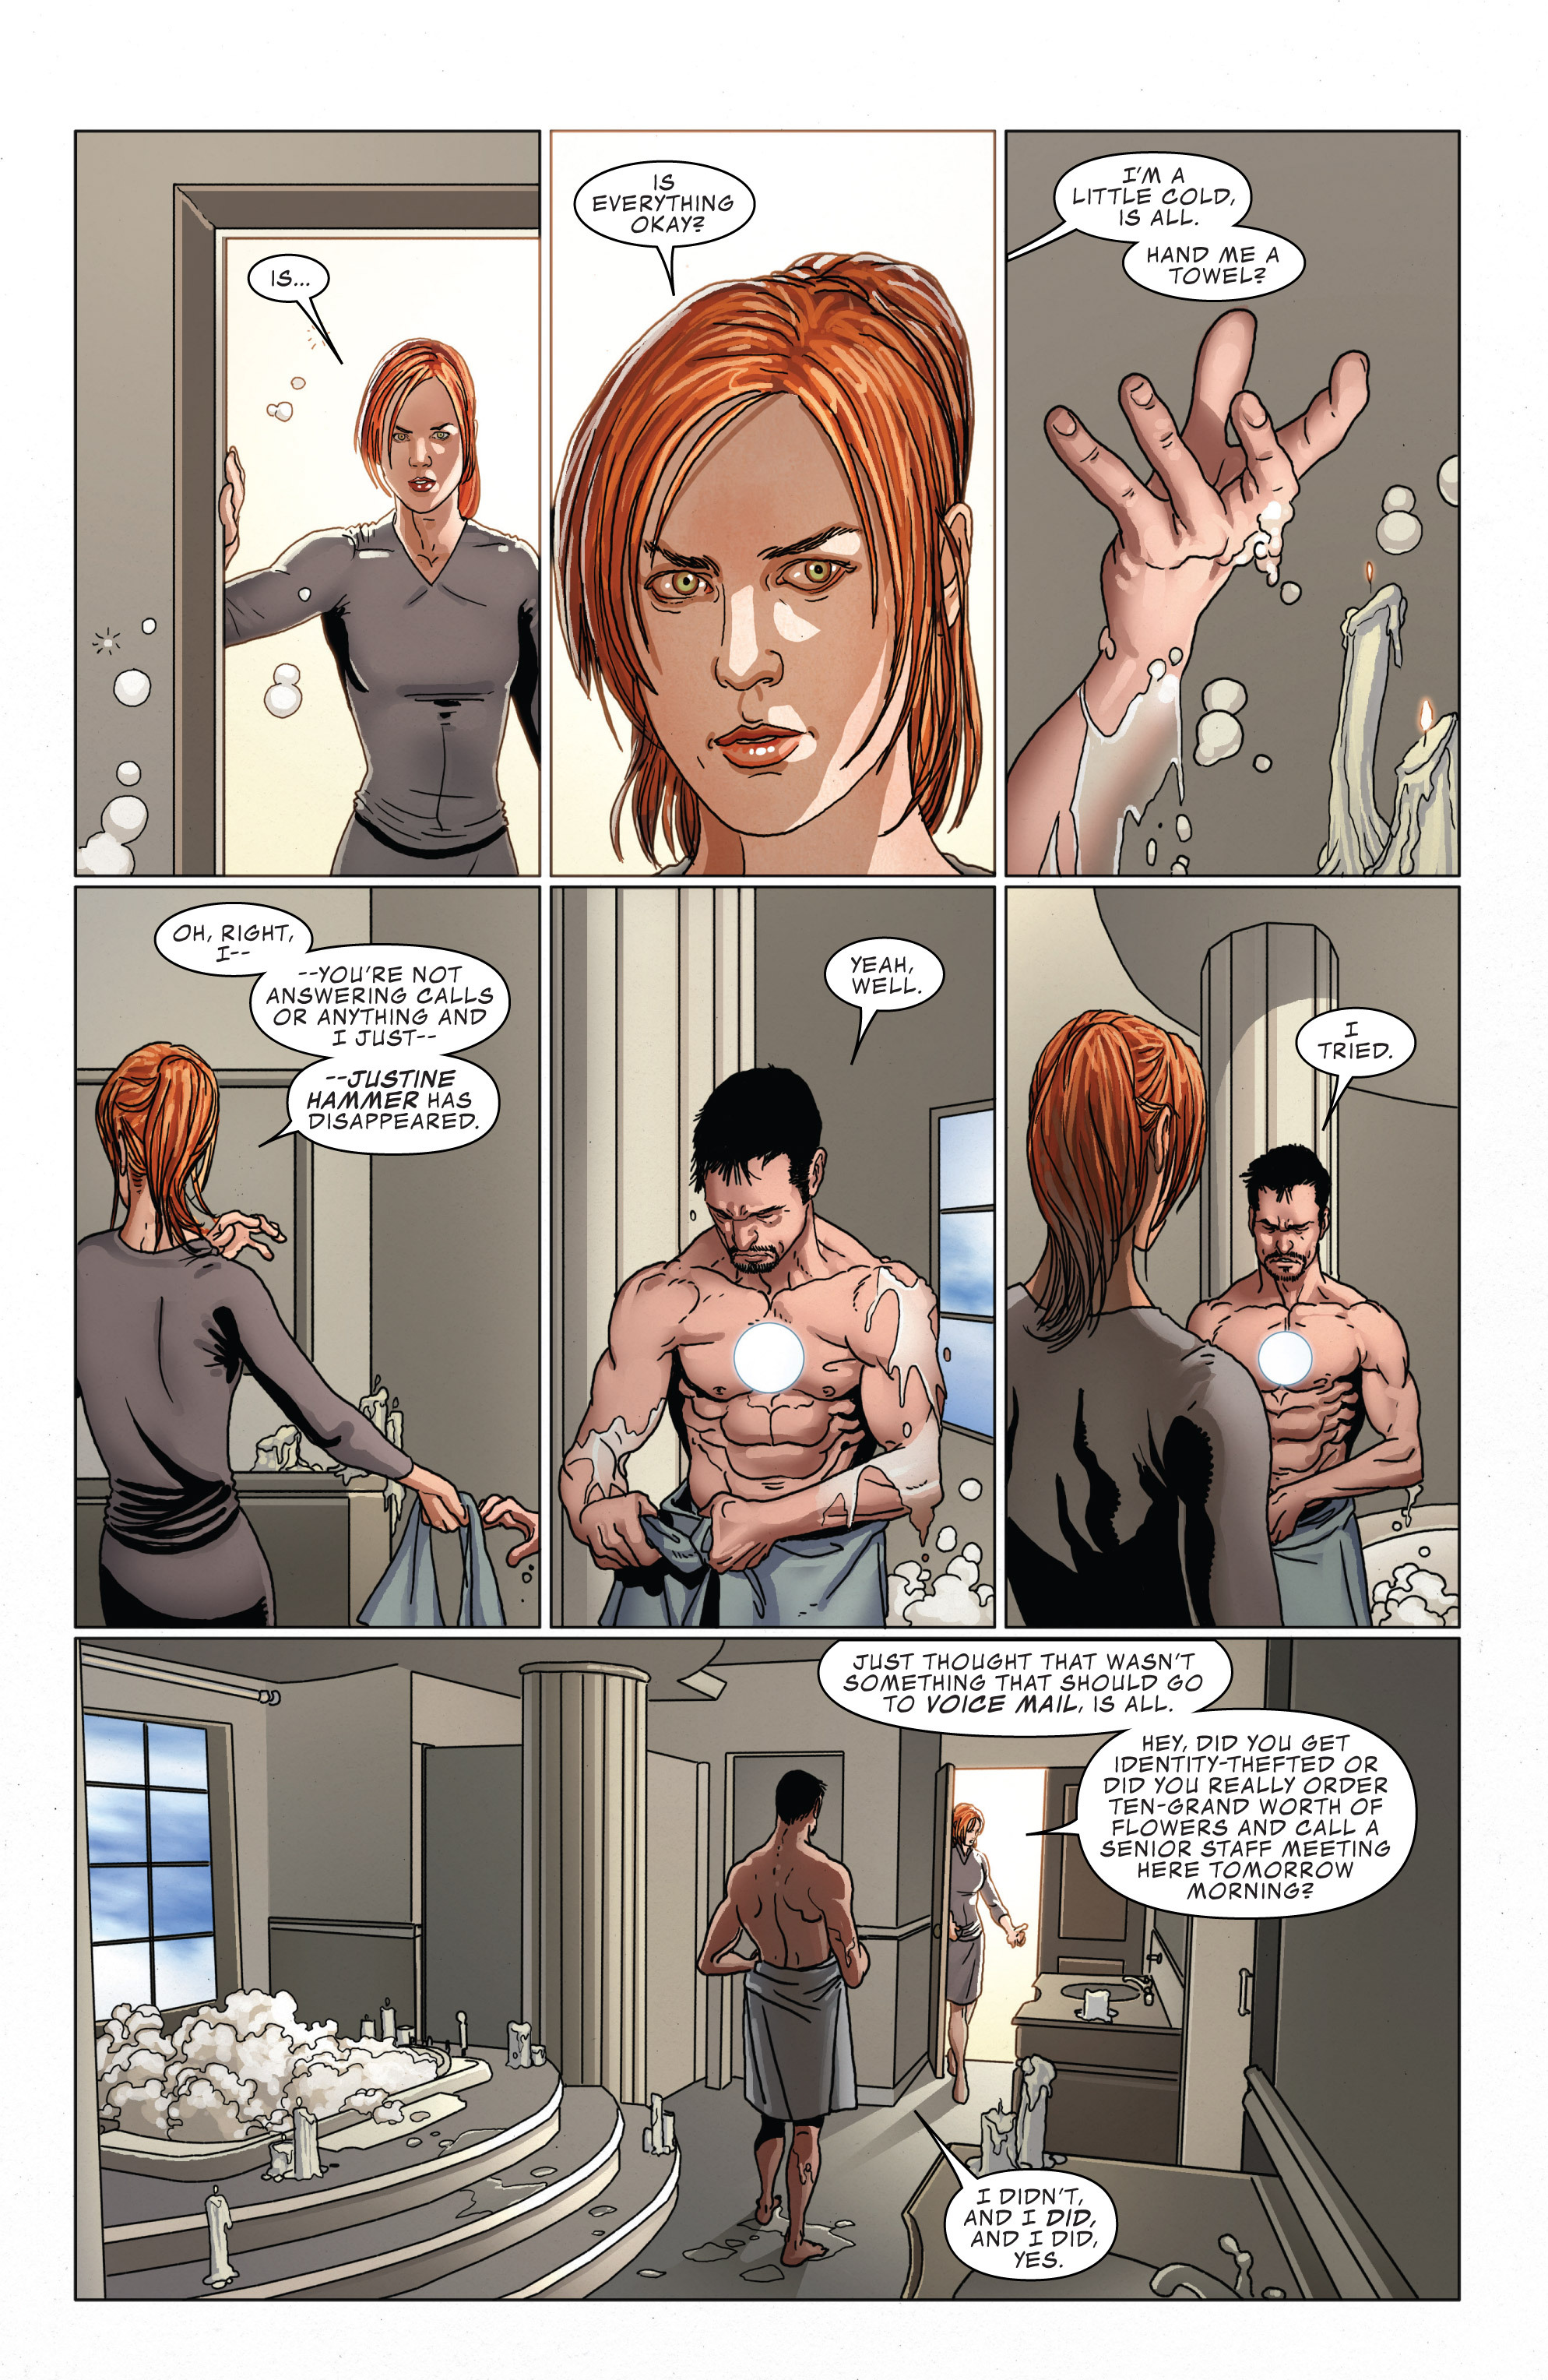 Invincible Iron Man (2008) 527 Page 17